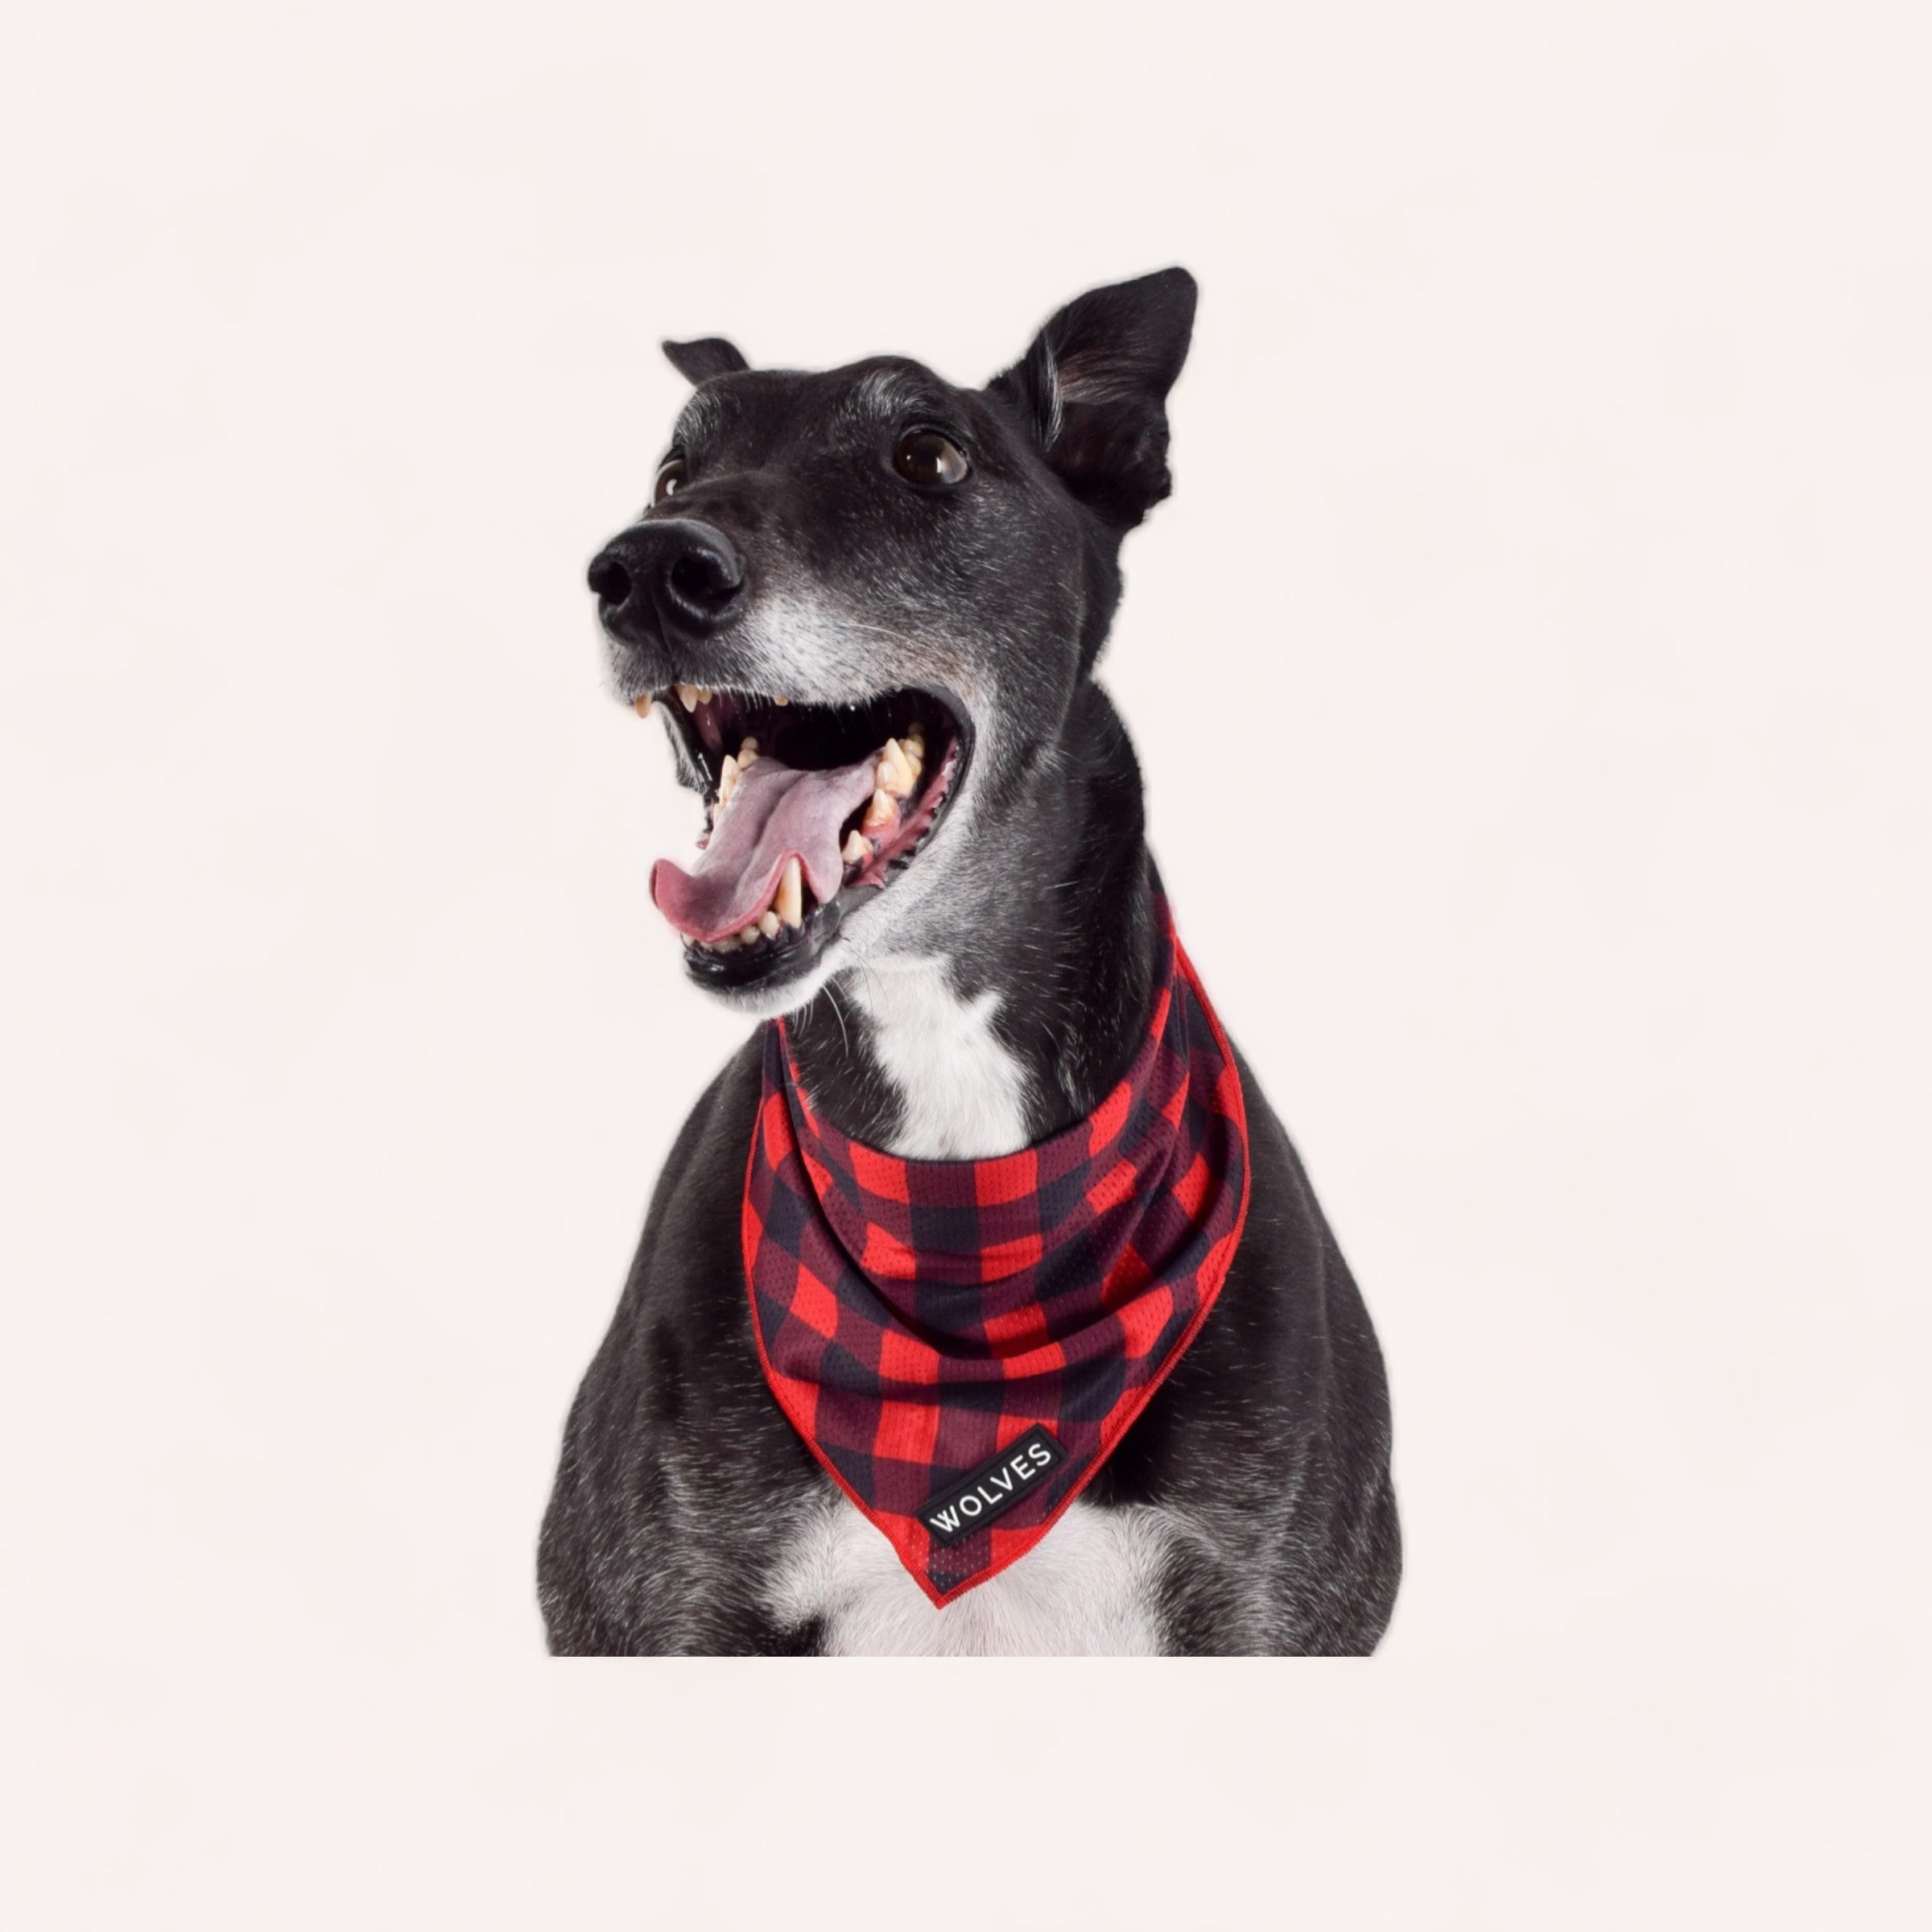 A cheerful black dog wearing a stylish, wrinkle-free Buffalo Bandana by Wolves of Wellington, looking to the side with its mouth open in a happy pant.